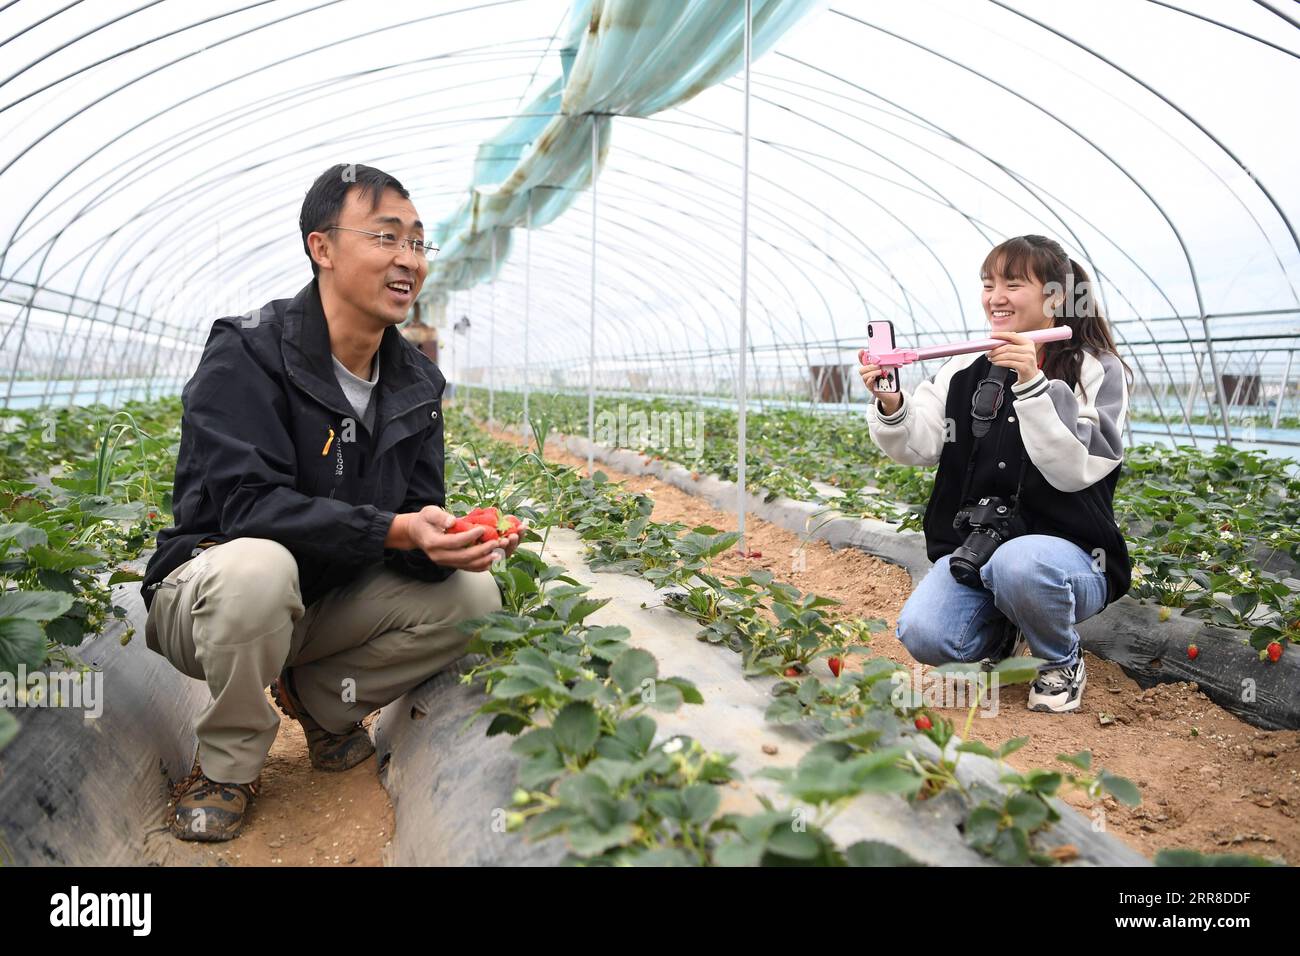 210503 -- TIANSHUI, May 3, 2021 -- Zhang Shuhao L promotes strawberries via on-line live streaming in a greenhouse in Mudan Township, Tianshui City of northwest China s Gansu Province, on April 27, 2021. Zhang Shuhao, 42, quit his well-paid job three years ago to start an agriculture company with a few partners sharing the same vision at a mountainous village in Mudan Township, Tianshui City. In three years, Xinghuarong, Zhang s company, contracted 6,200 mu about 413 hectares of idle arable lands, where terraced fields, greenhouses, and a reservoir have been built to grow diverse produces rang Stock Photo